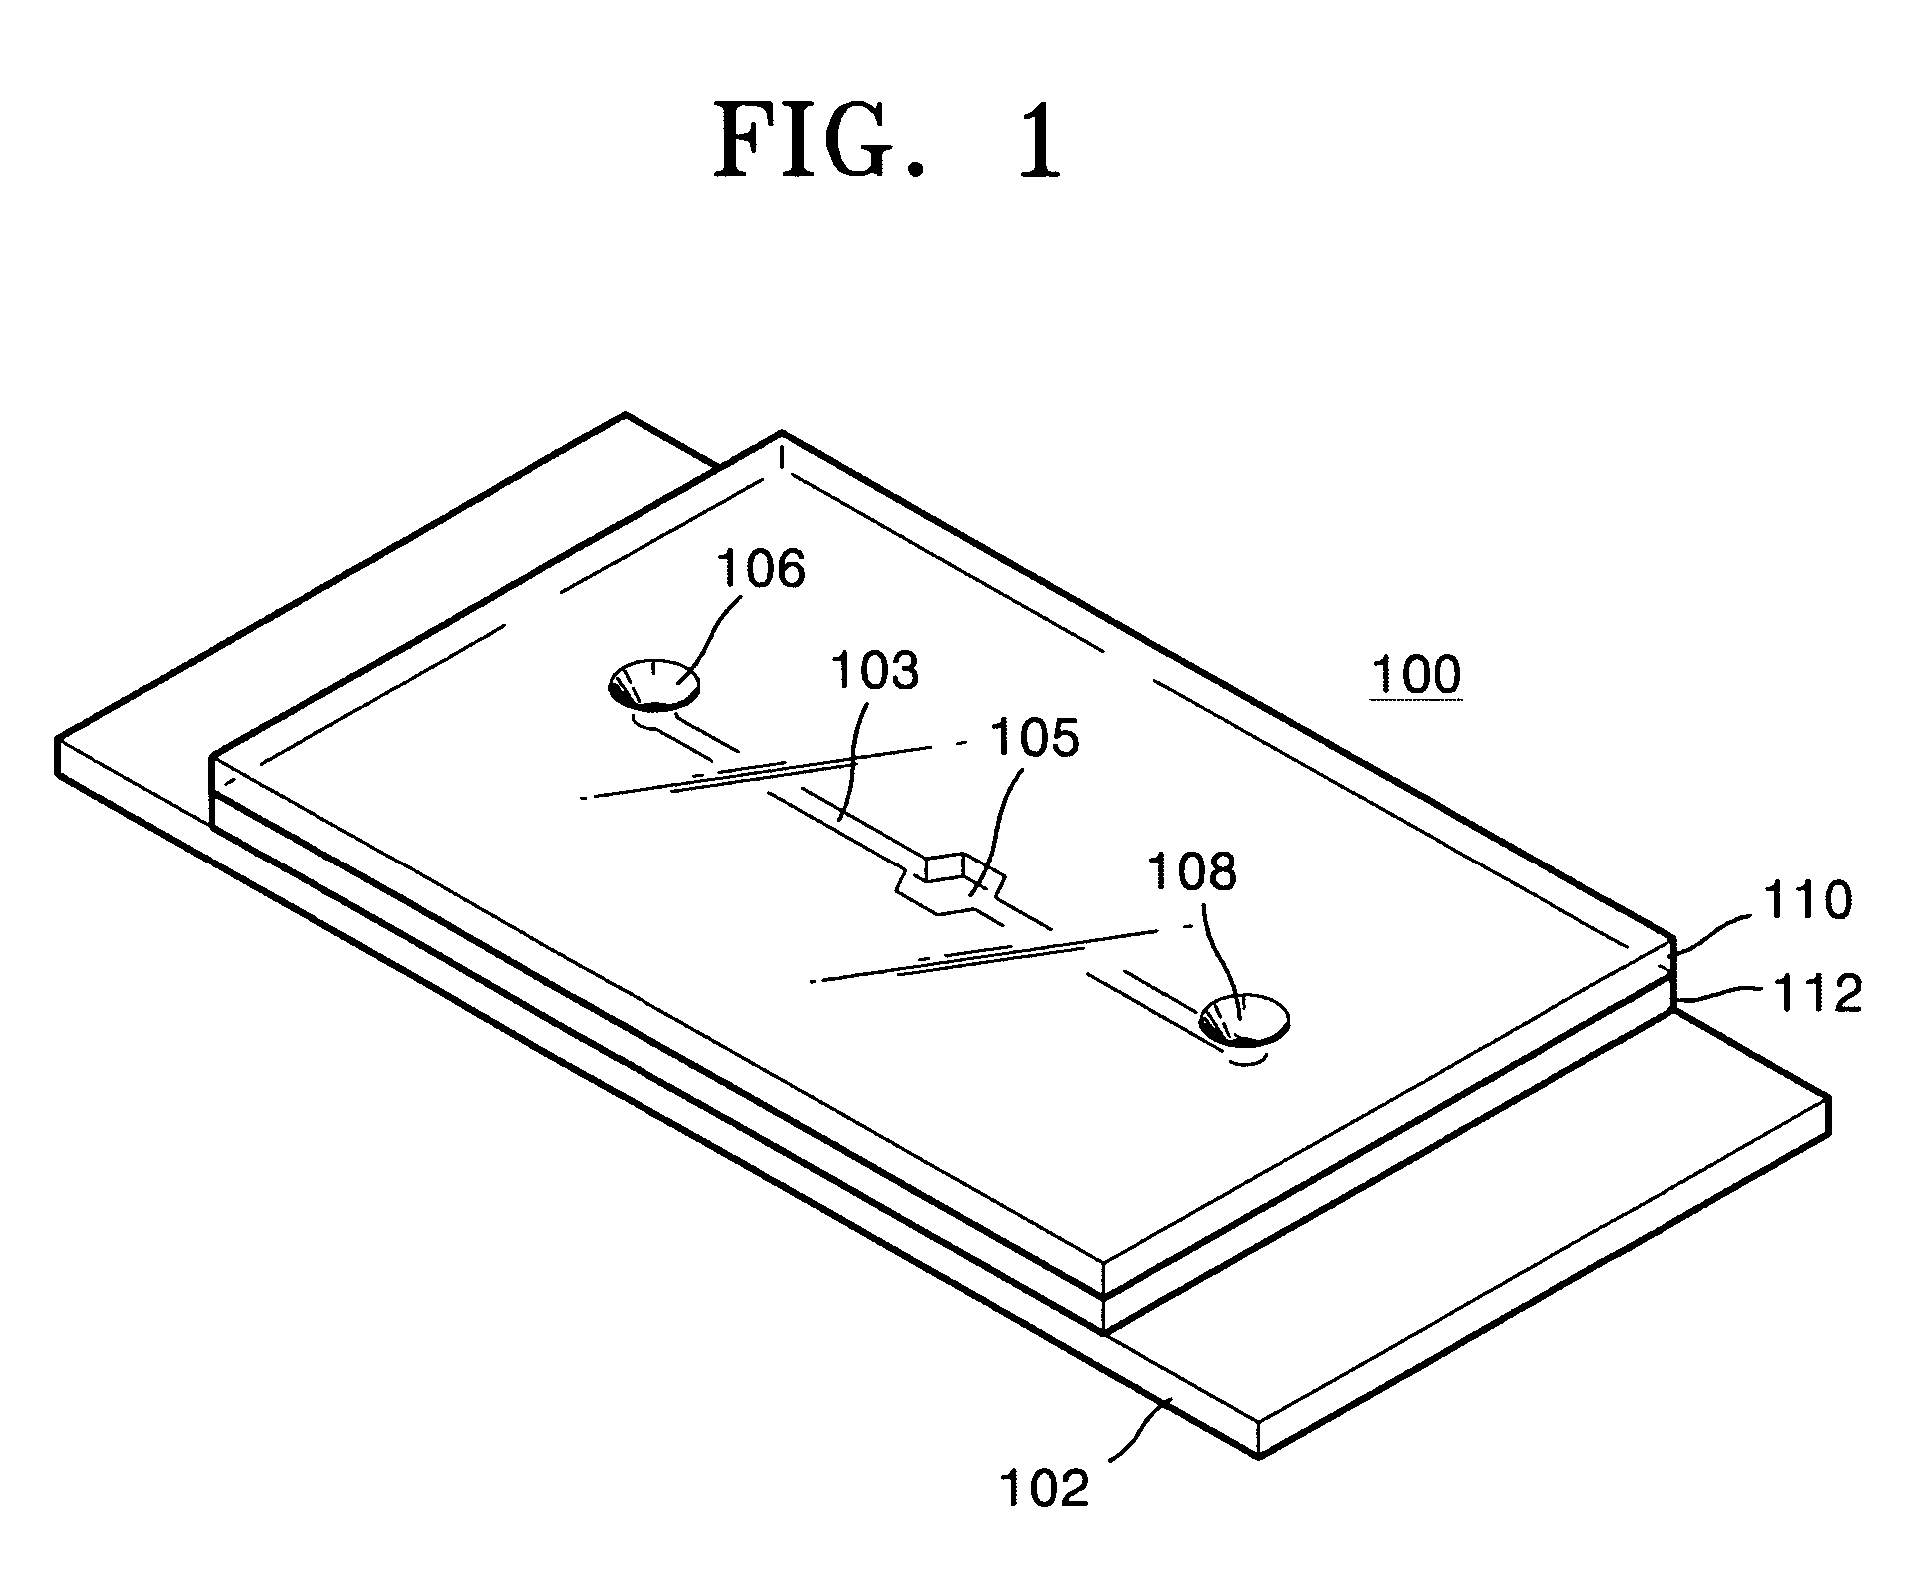 Fluorescence detector for detecting microfluid